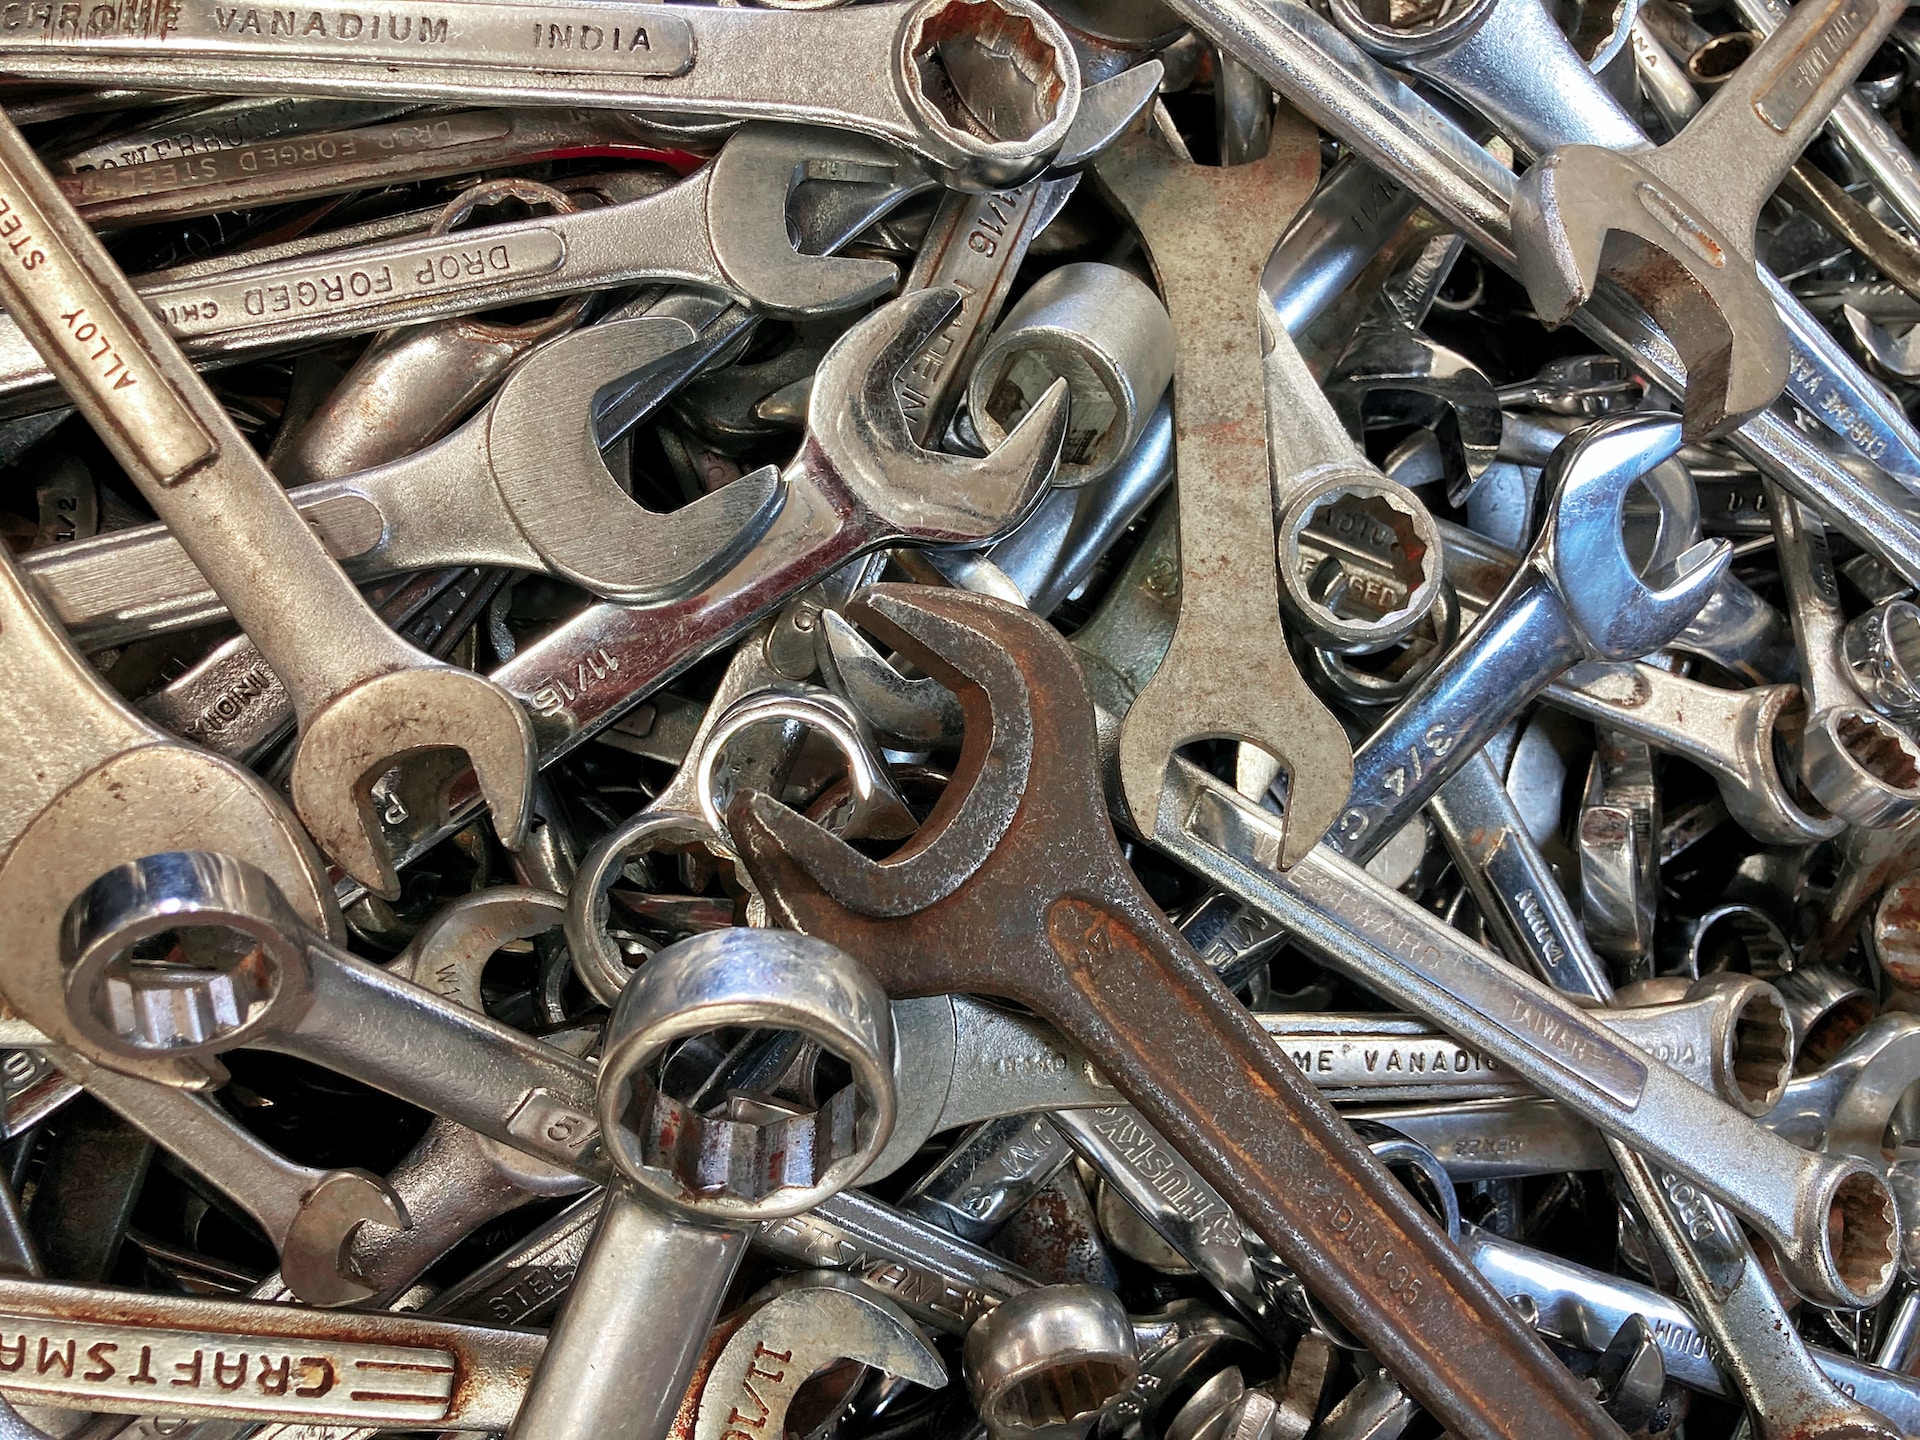 A collection of spanners